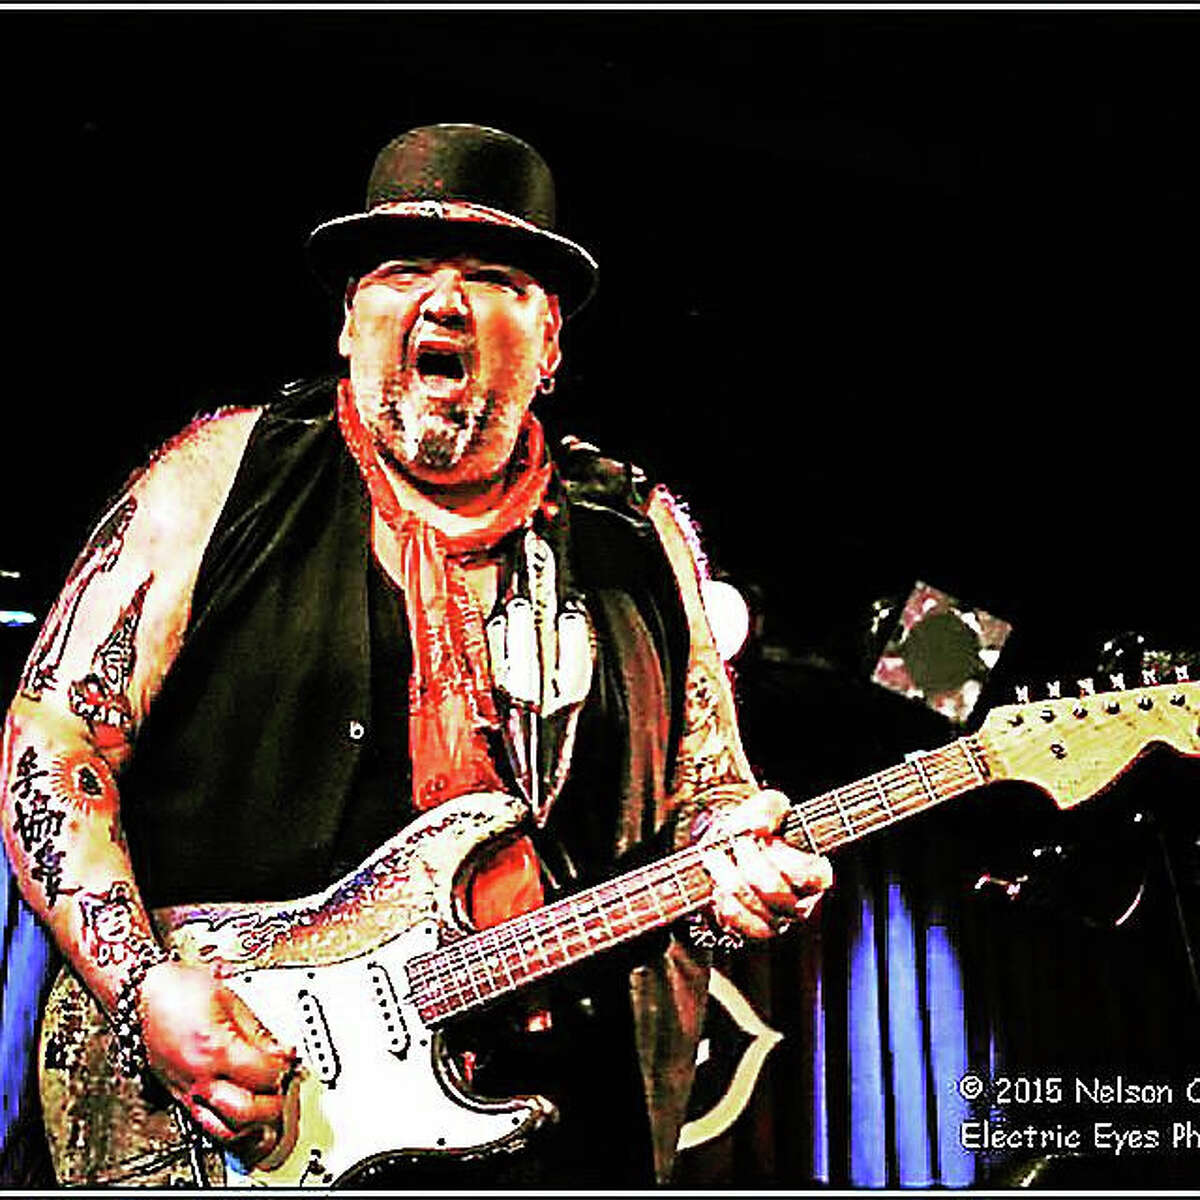 Electric Eyes PhotographyPopa Chubby stops at Black-Eyed Sally's this weekend during his concert tour.